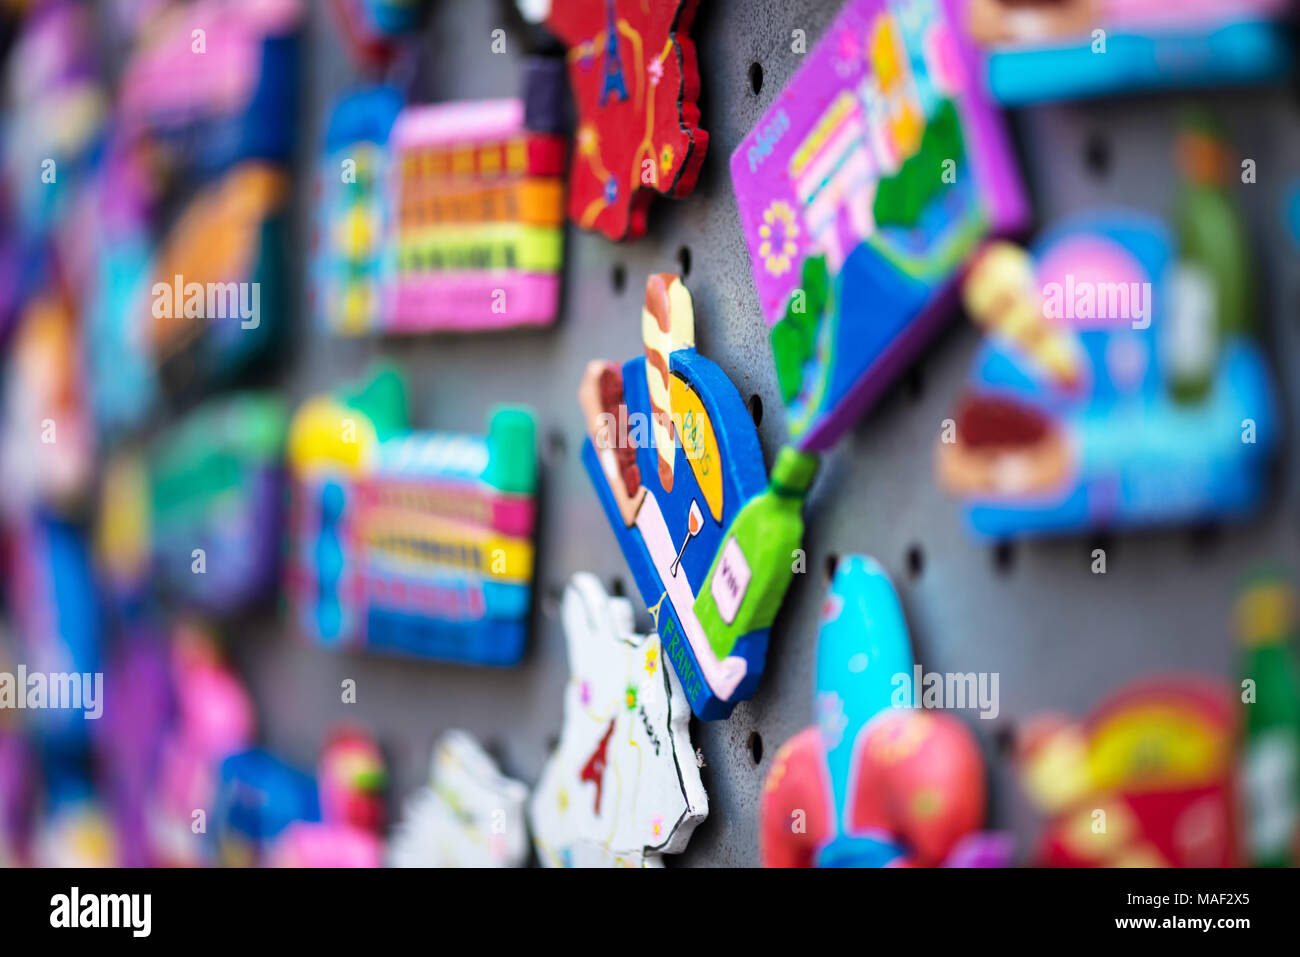 Paris, France - March 20, 2018: fridge magnets close-up. Magnetics for tourists with images of the sights of Paris. Stock Photo